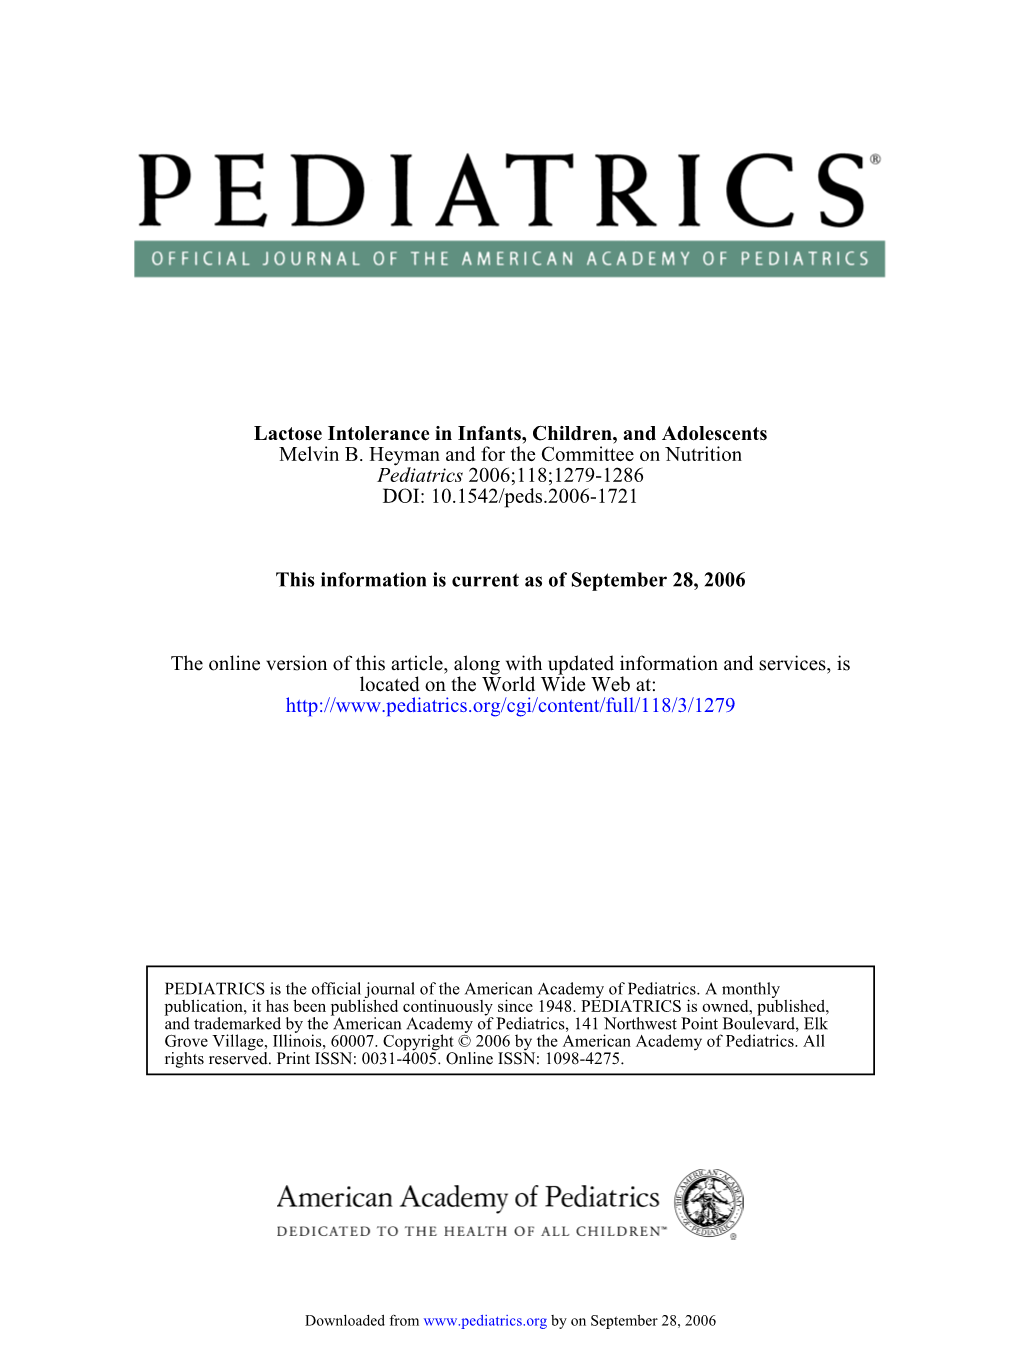 Lactose Intolerance in Infants, Children, and Adolescents Melvin B